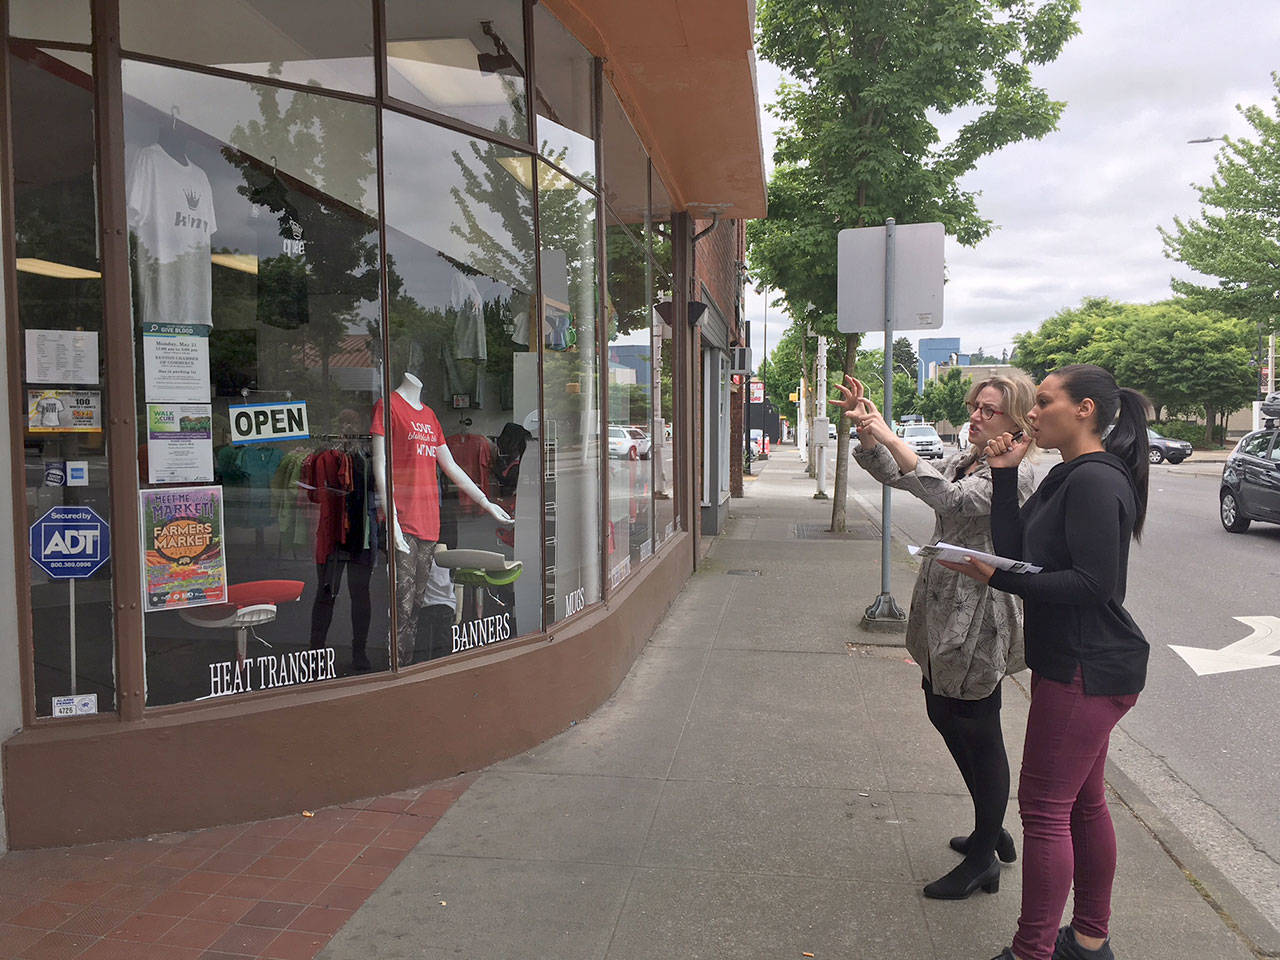 A consultant working with store owner in downtown Renton. In 2018, Renton hosted a several workshops called “Creating Stellar Storefronts” funded through the Economic Development Partnership program. Courtesy of the Port of Seattle